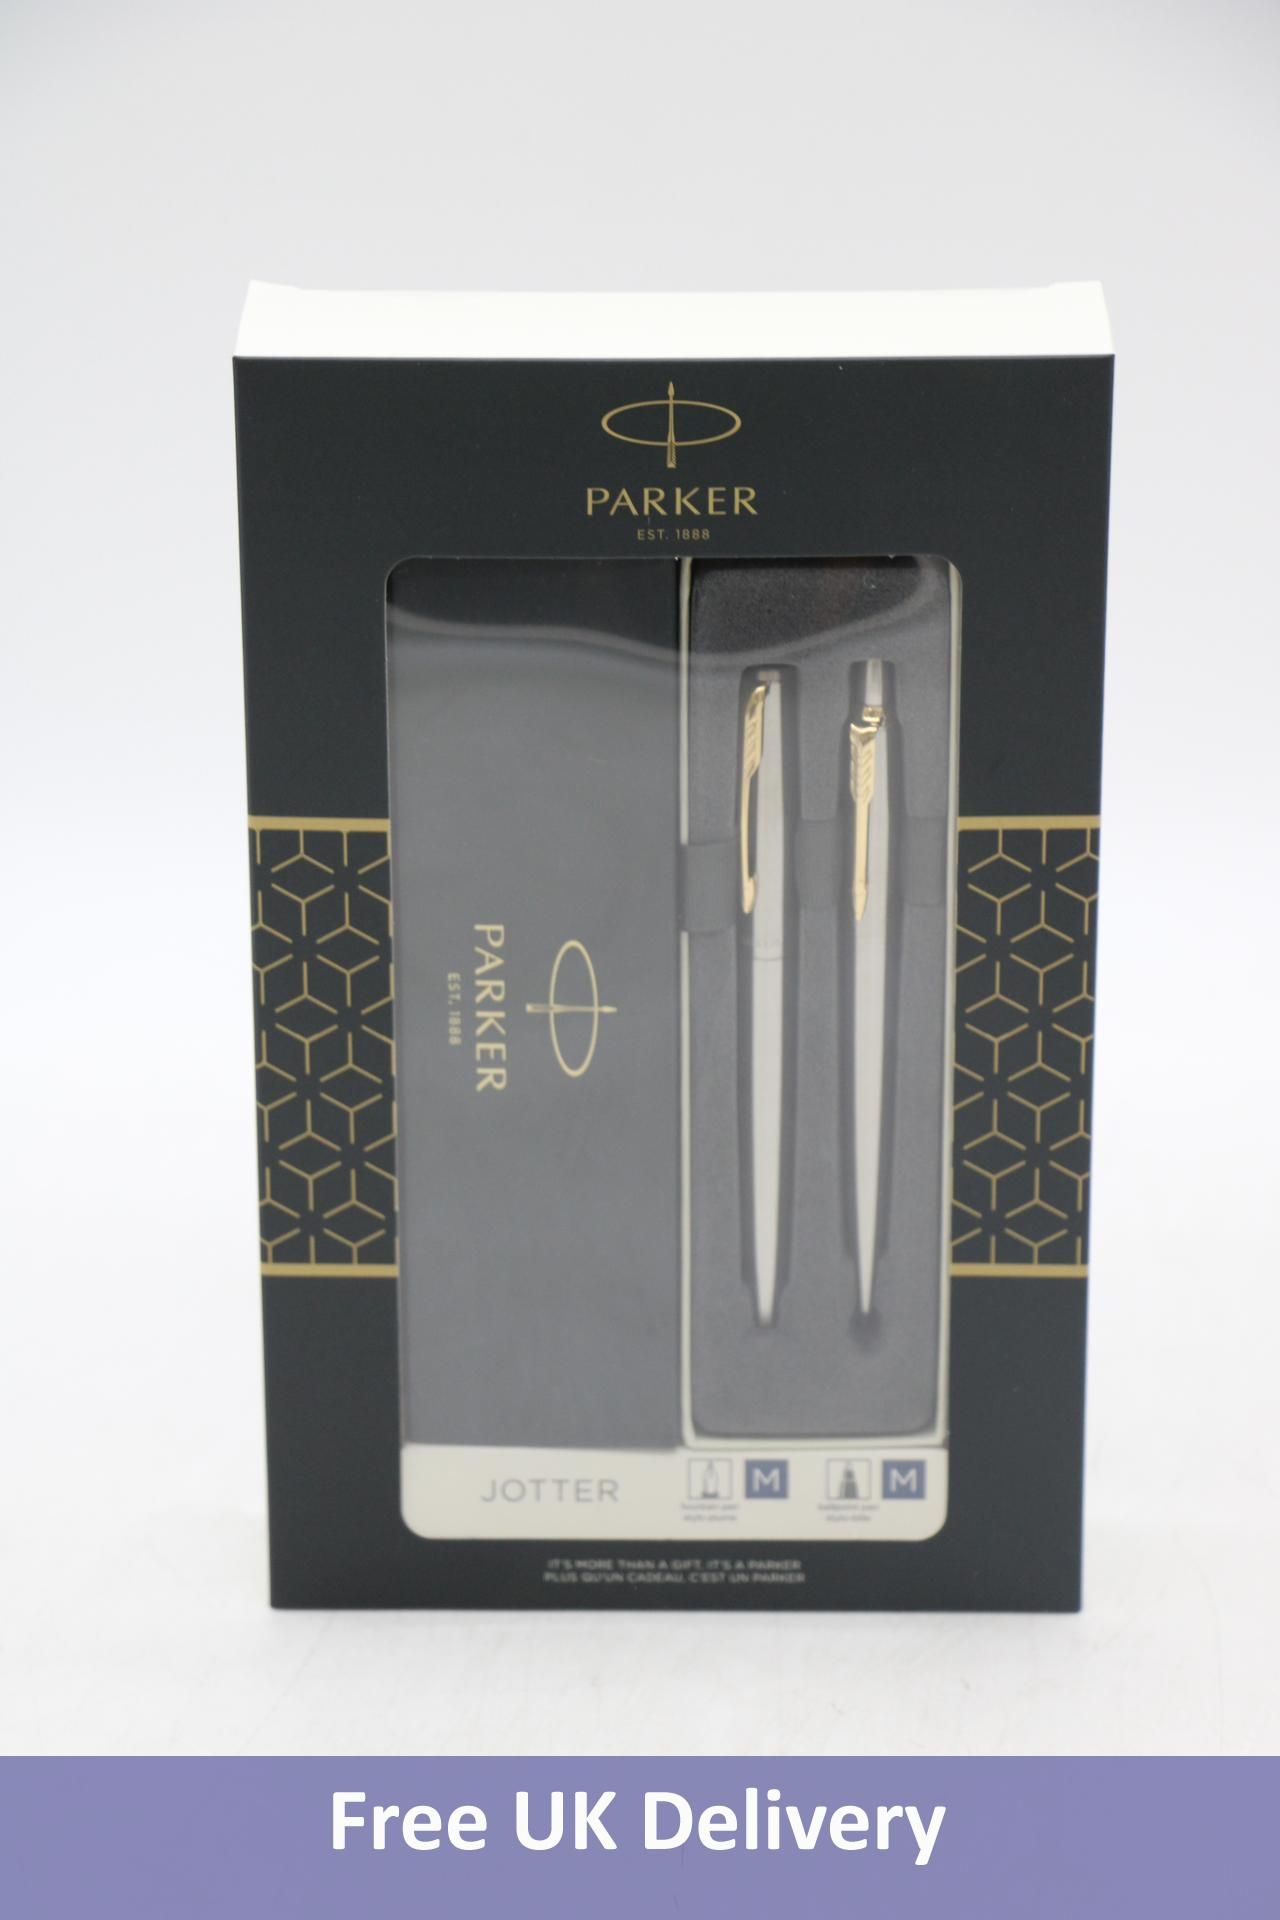 Two Parker Pen Gift Sets, Silver/Gold